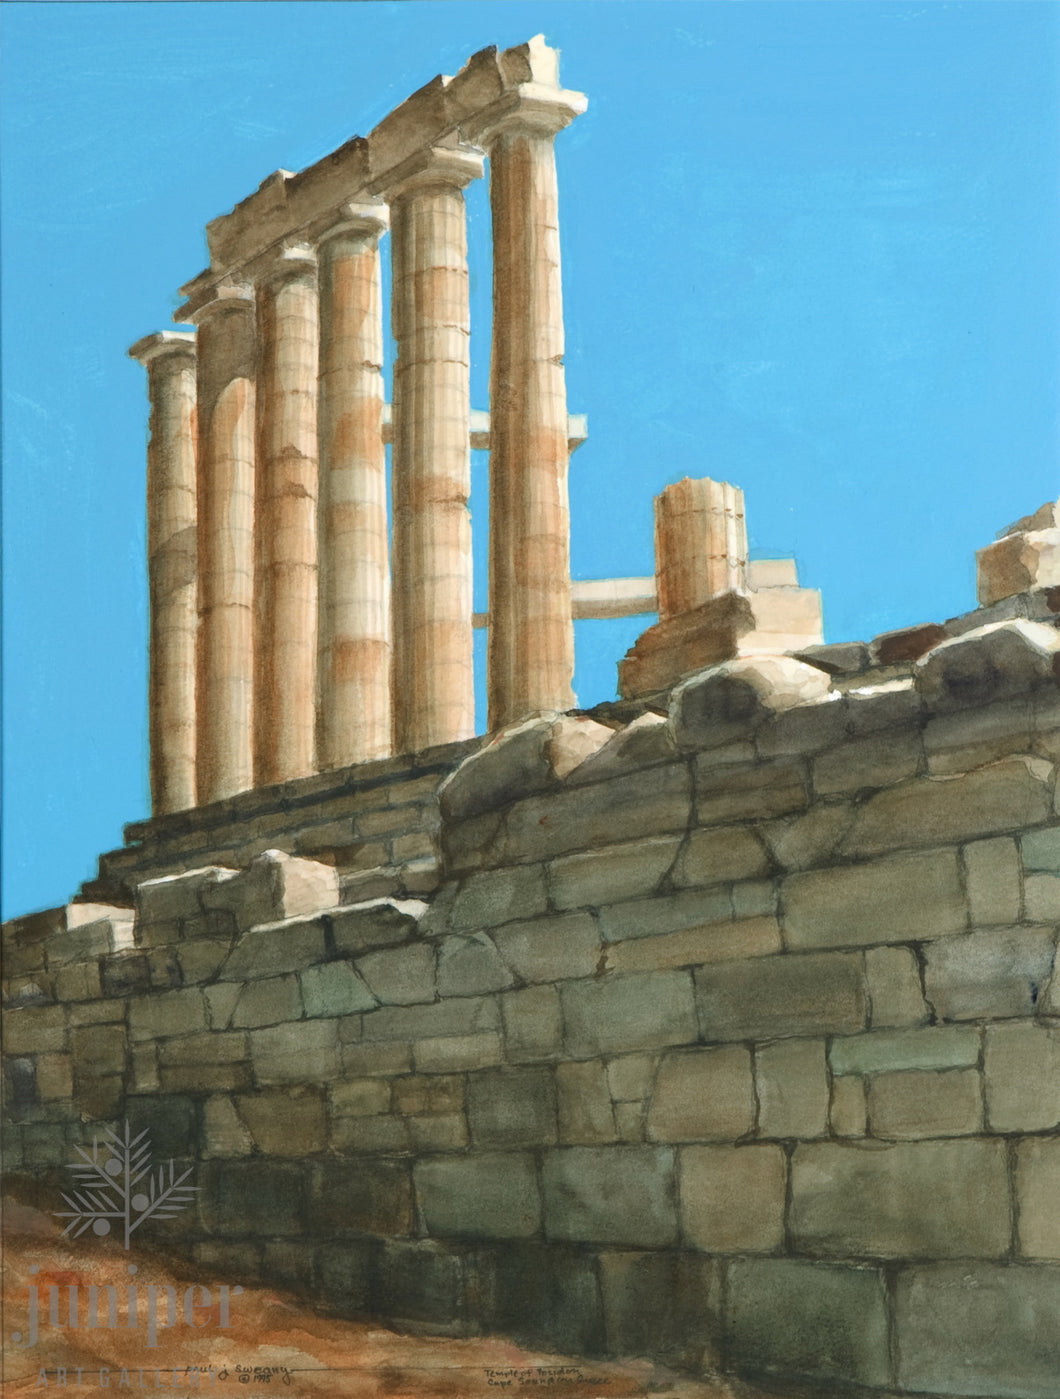 Temple of Poseidon, reproduction from original watercolor by Paul J Sweany